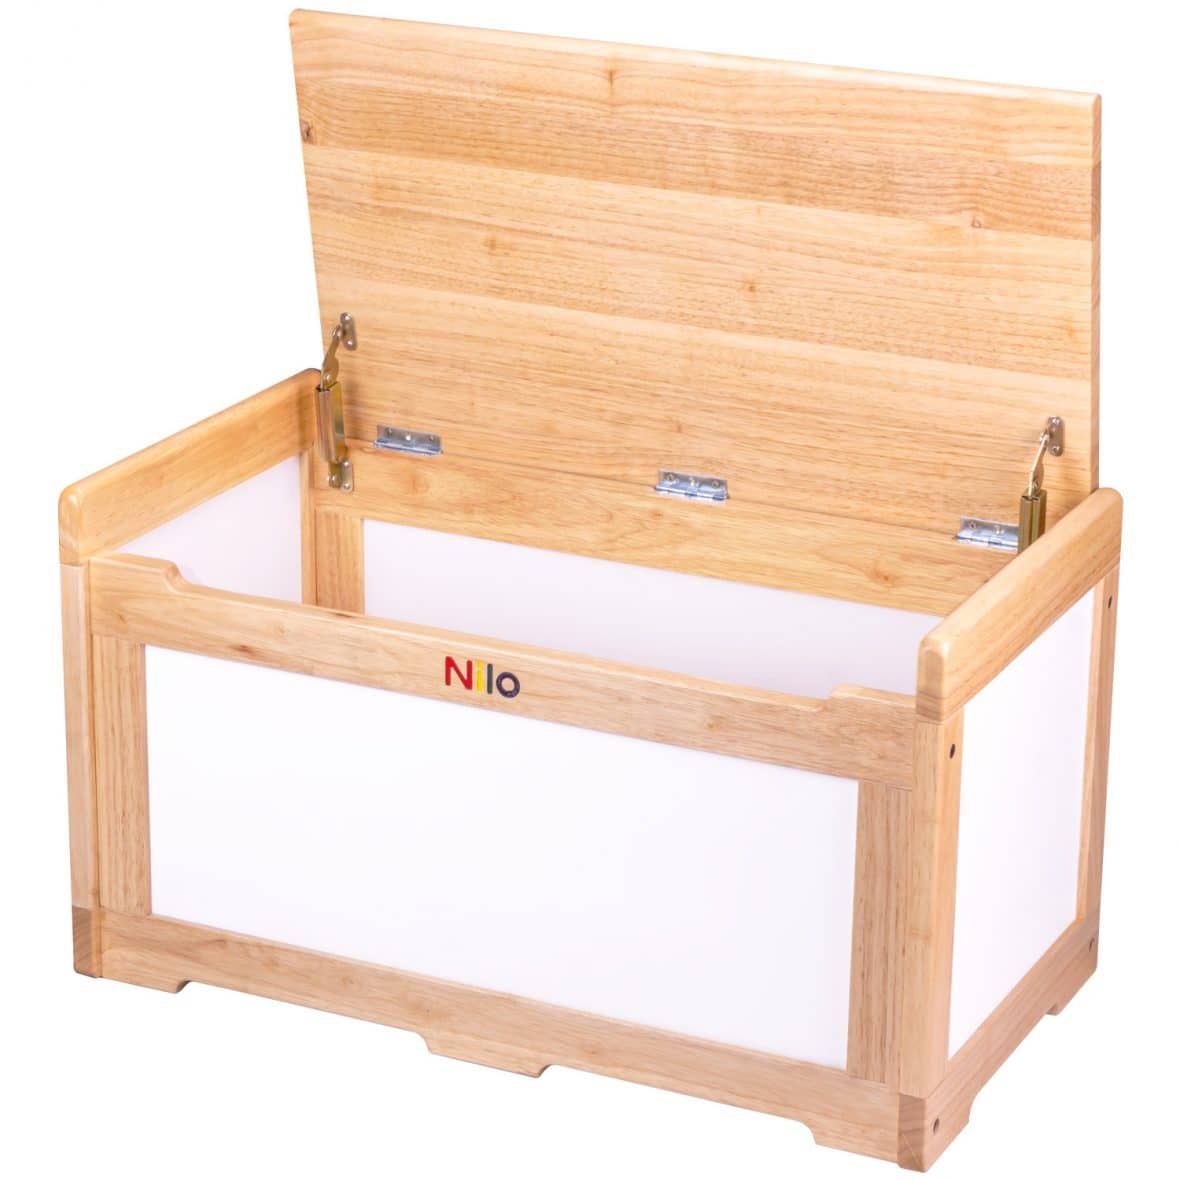 Large Wooden Toy Box for Kids with Lid